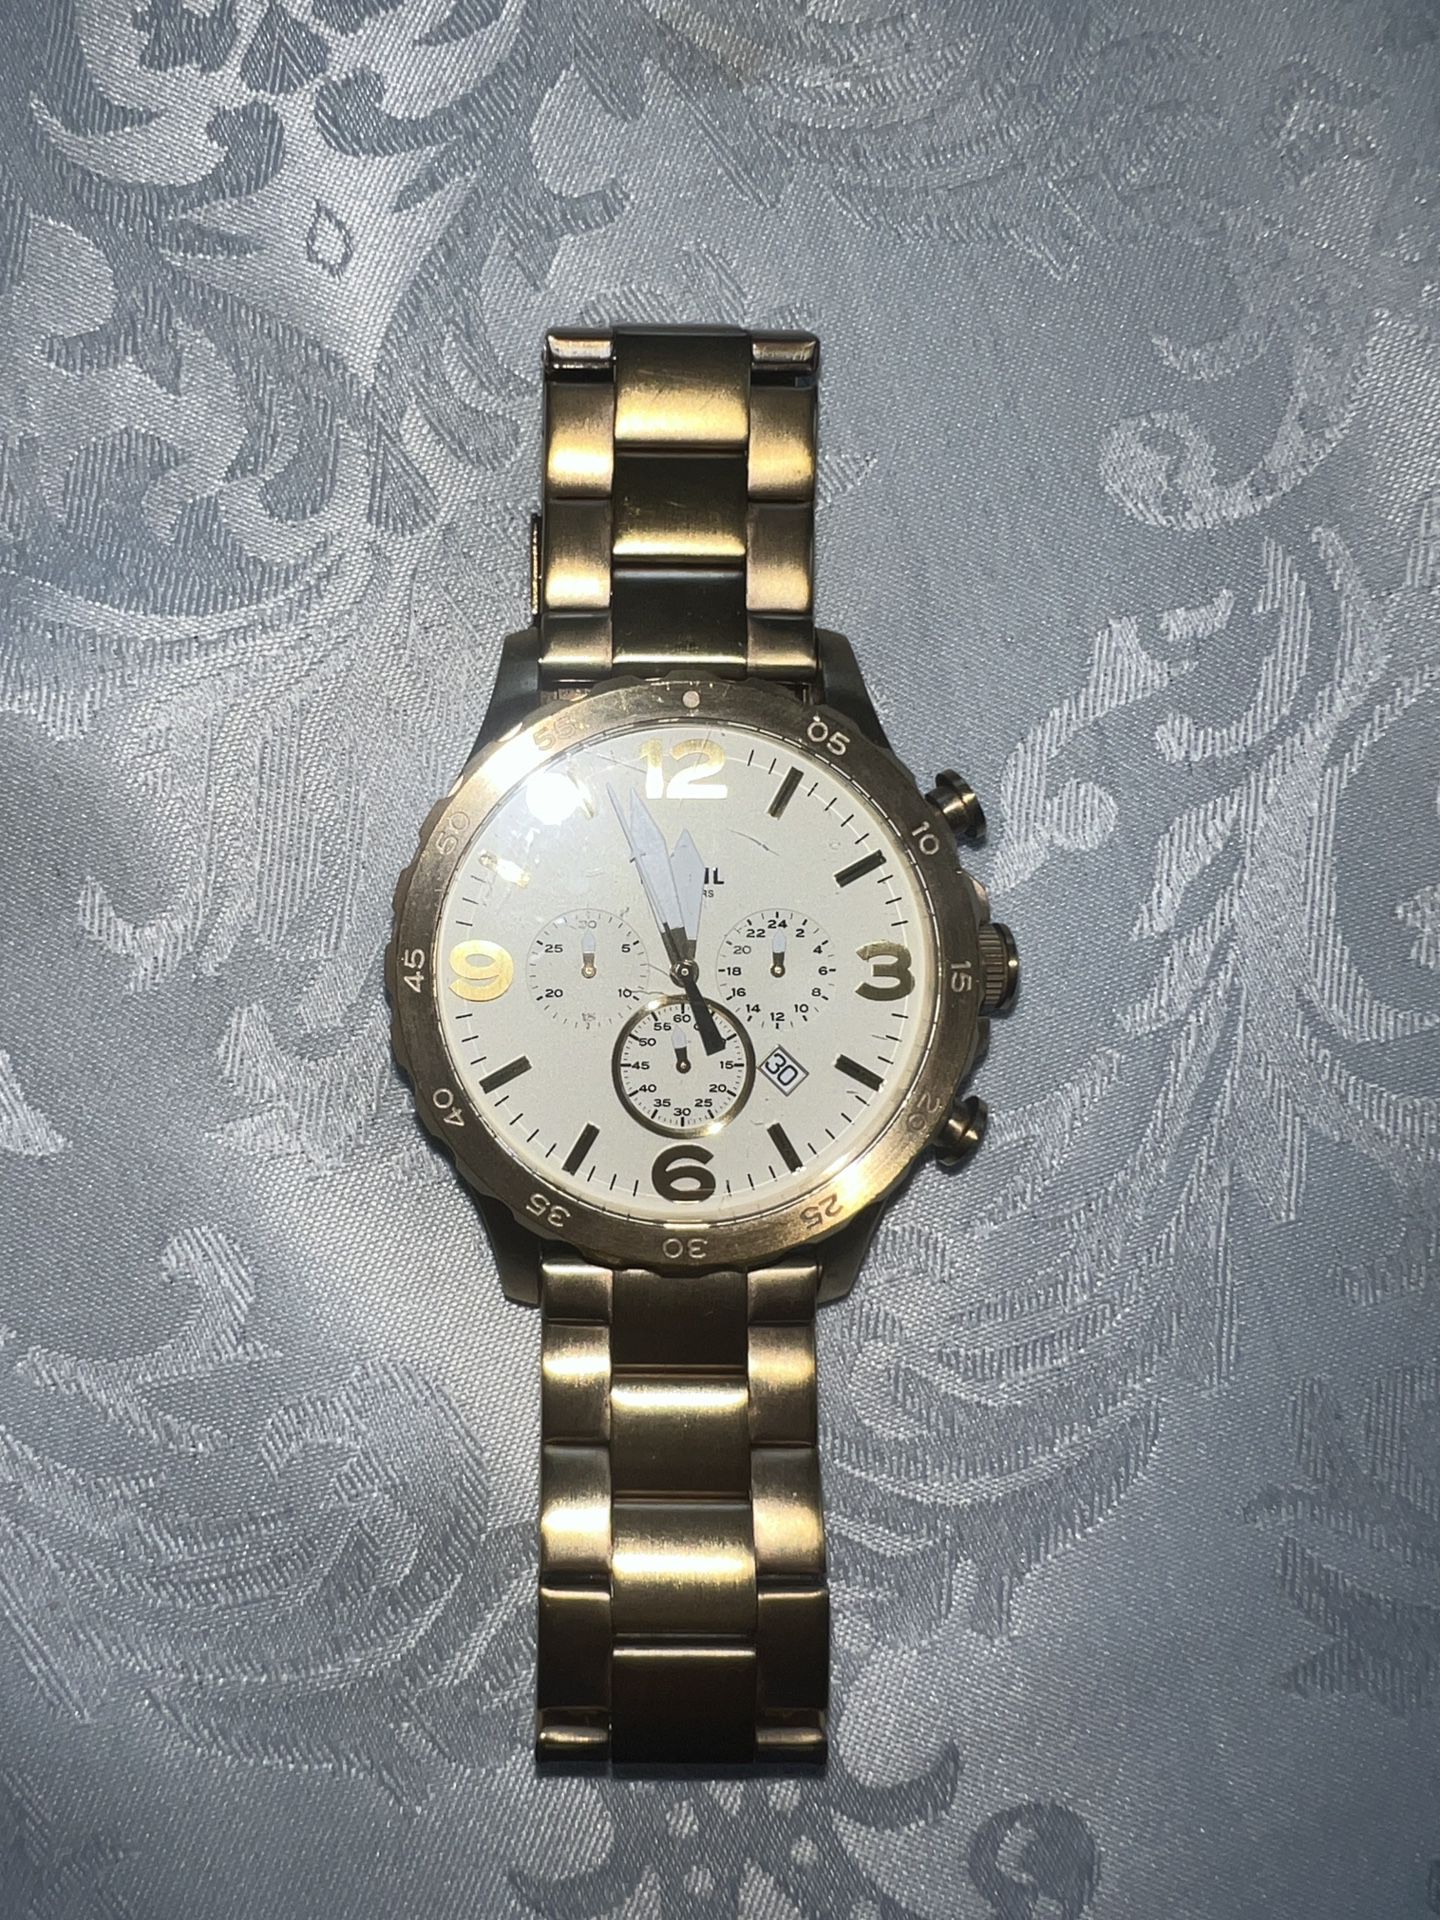 Gold Fossil JR1479 Really Big Face Watch With Gold Stainless Steel Band